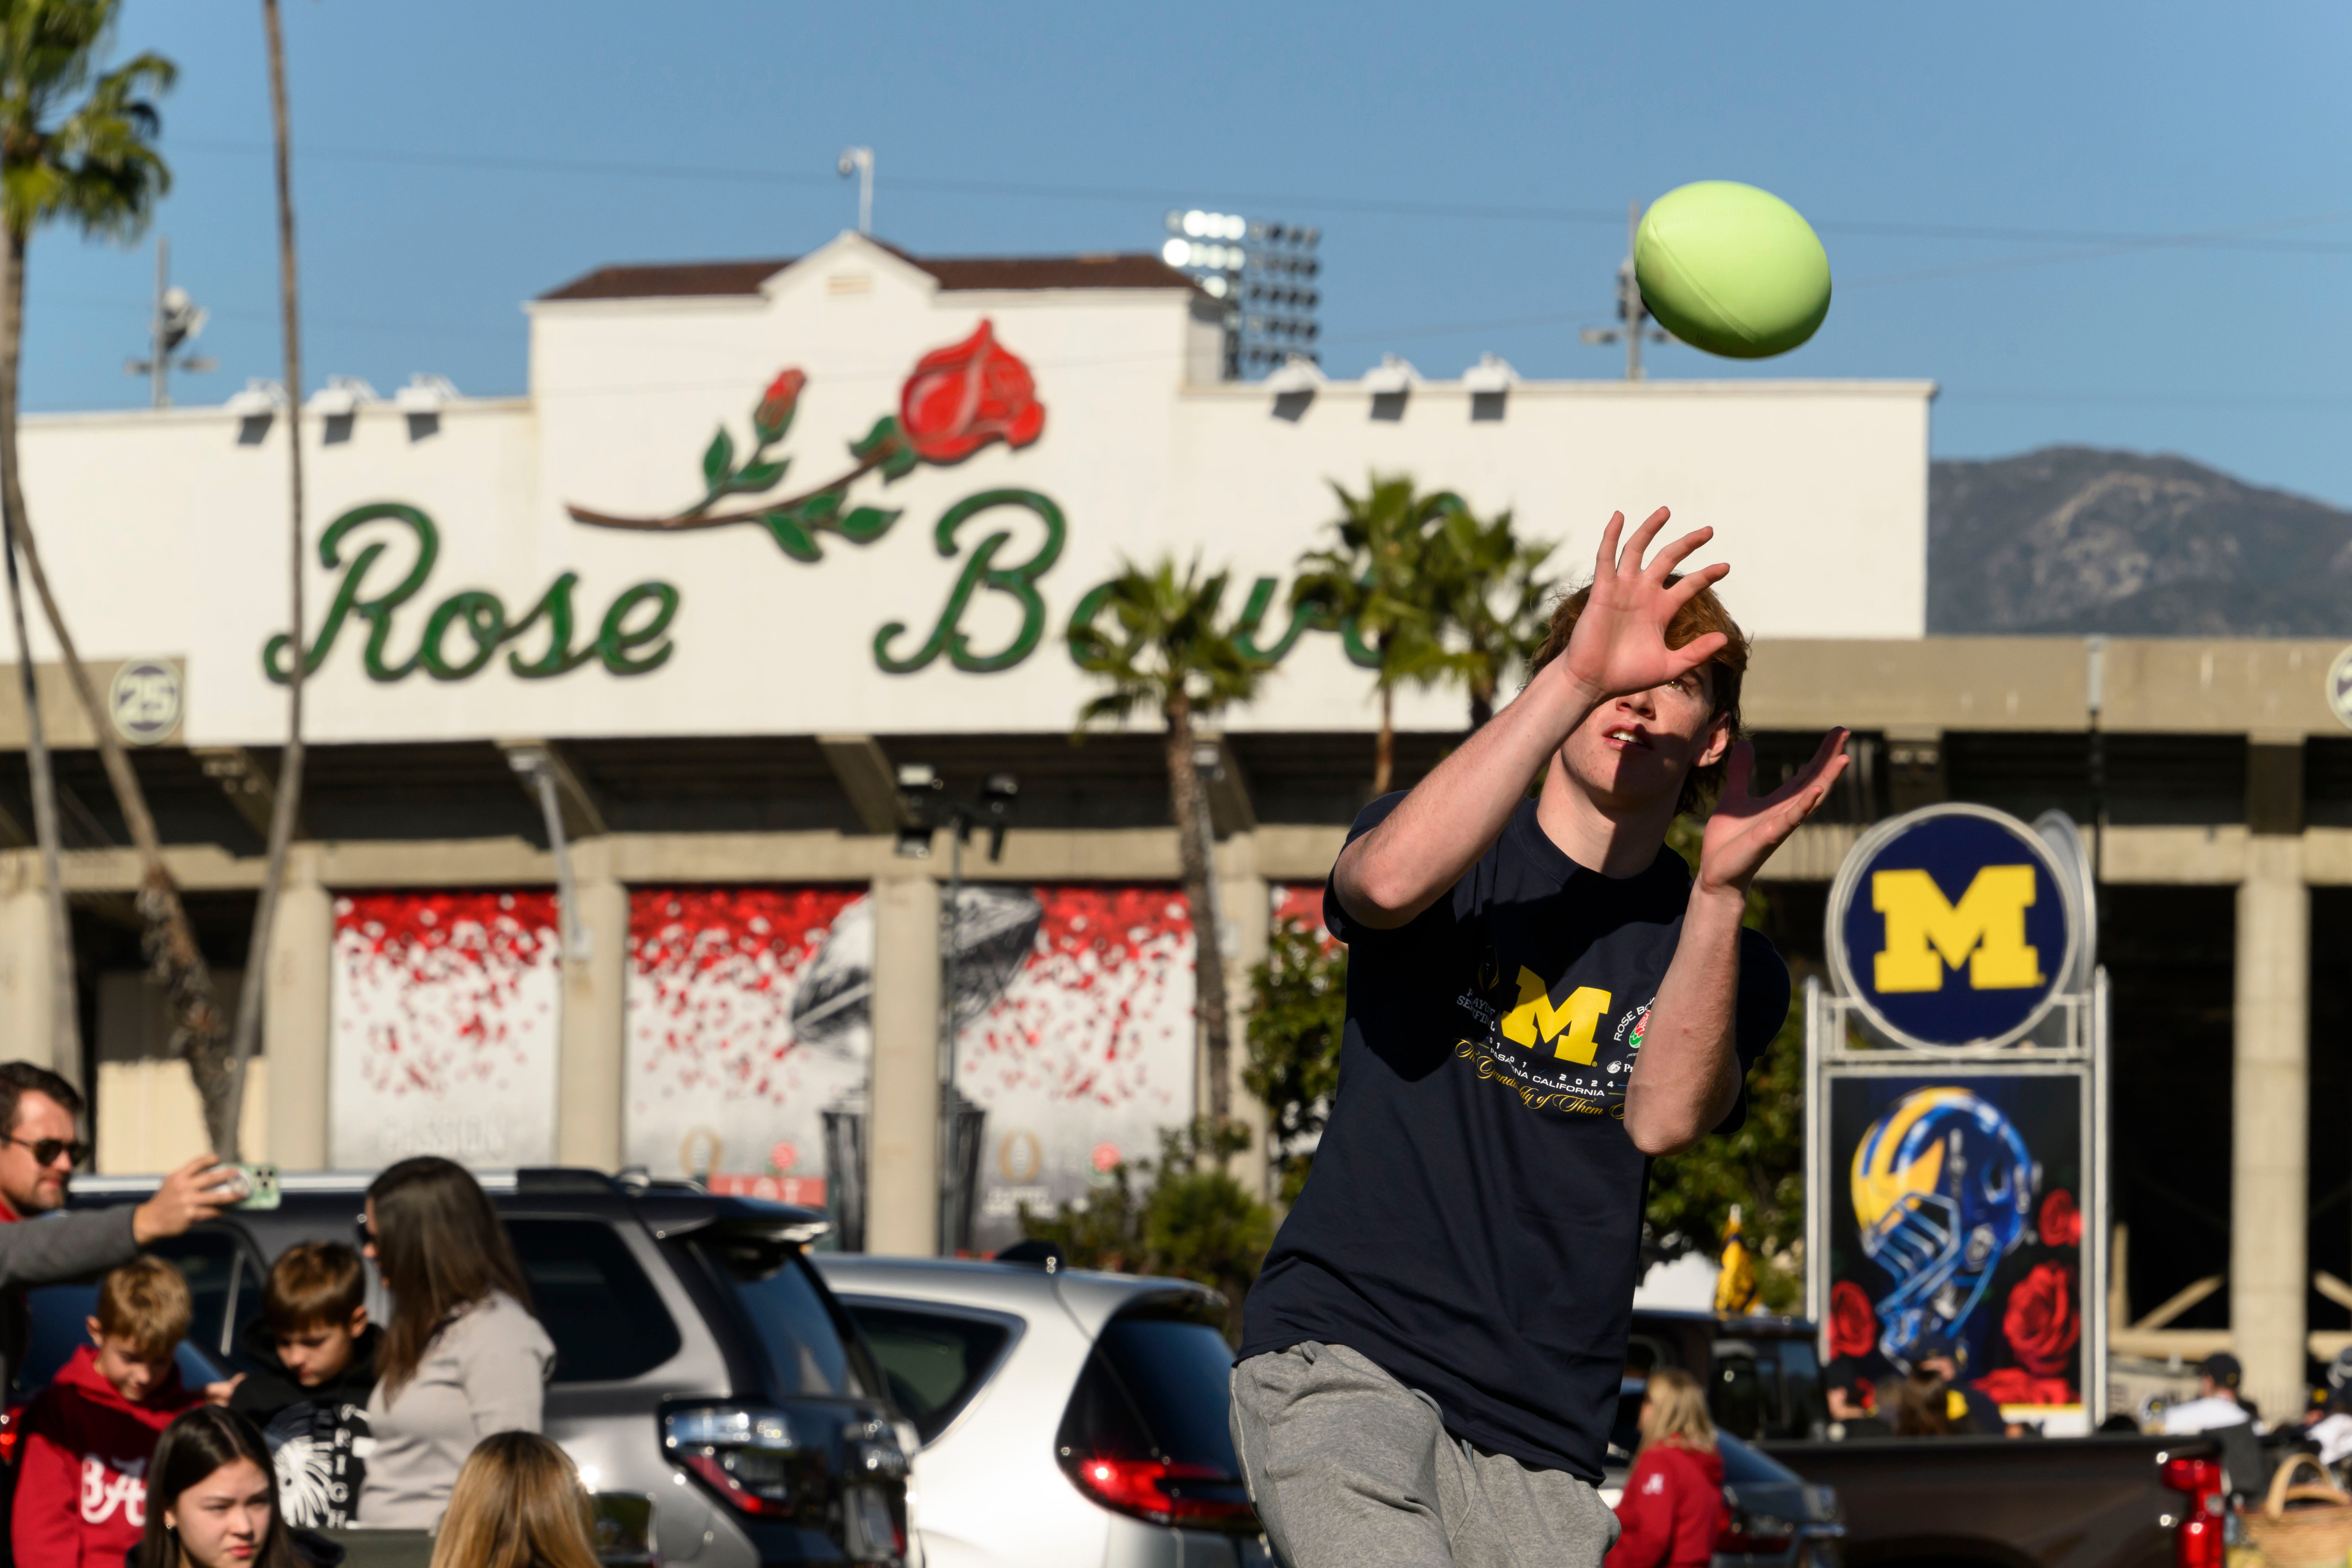 Sixteen-year-old Riley Ulin, of Marin, California, plays catch before the start of the Rose Bowl.